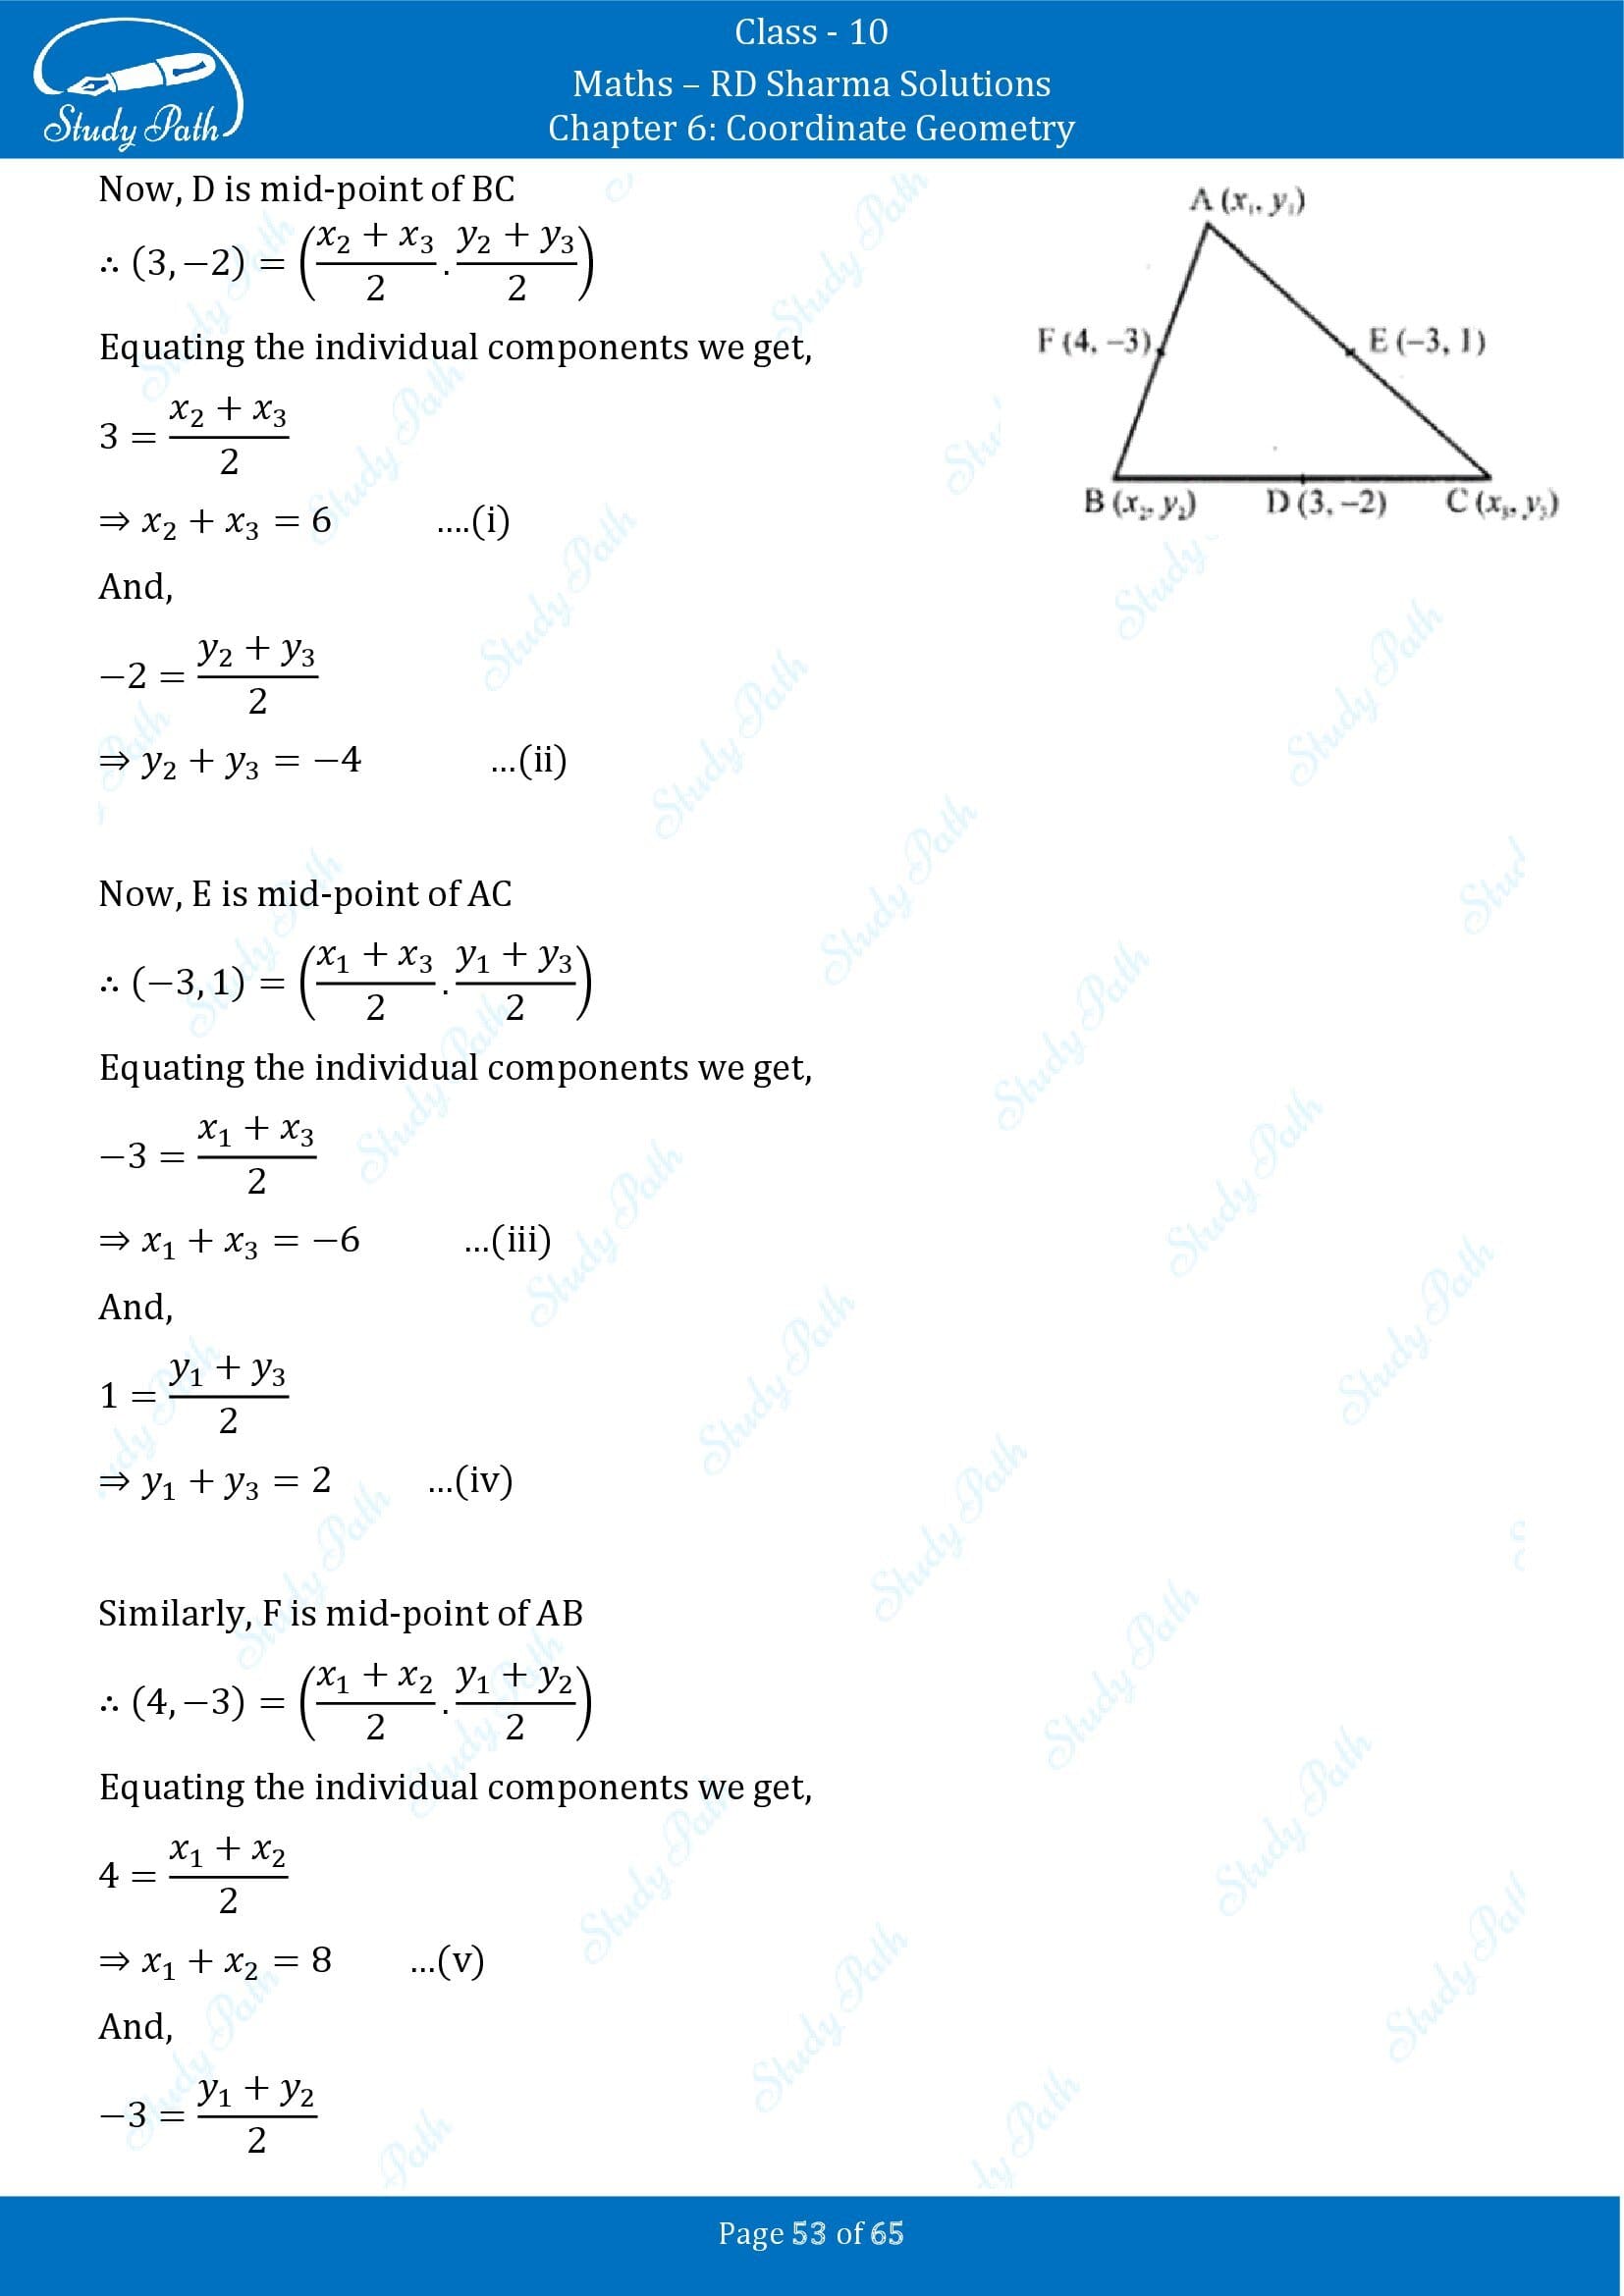 RD Sharma Solutions Class 10 Chapter 6 Coordinate Geometry Exercise 6.3 00053